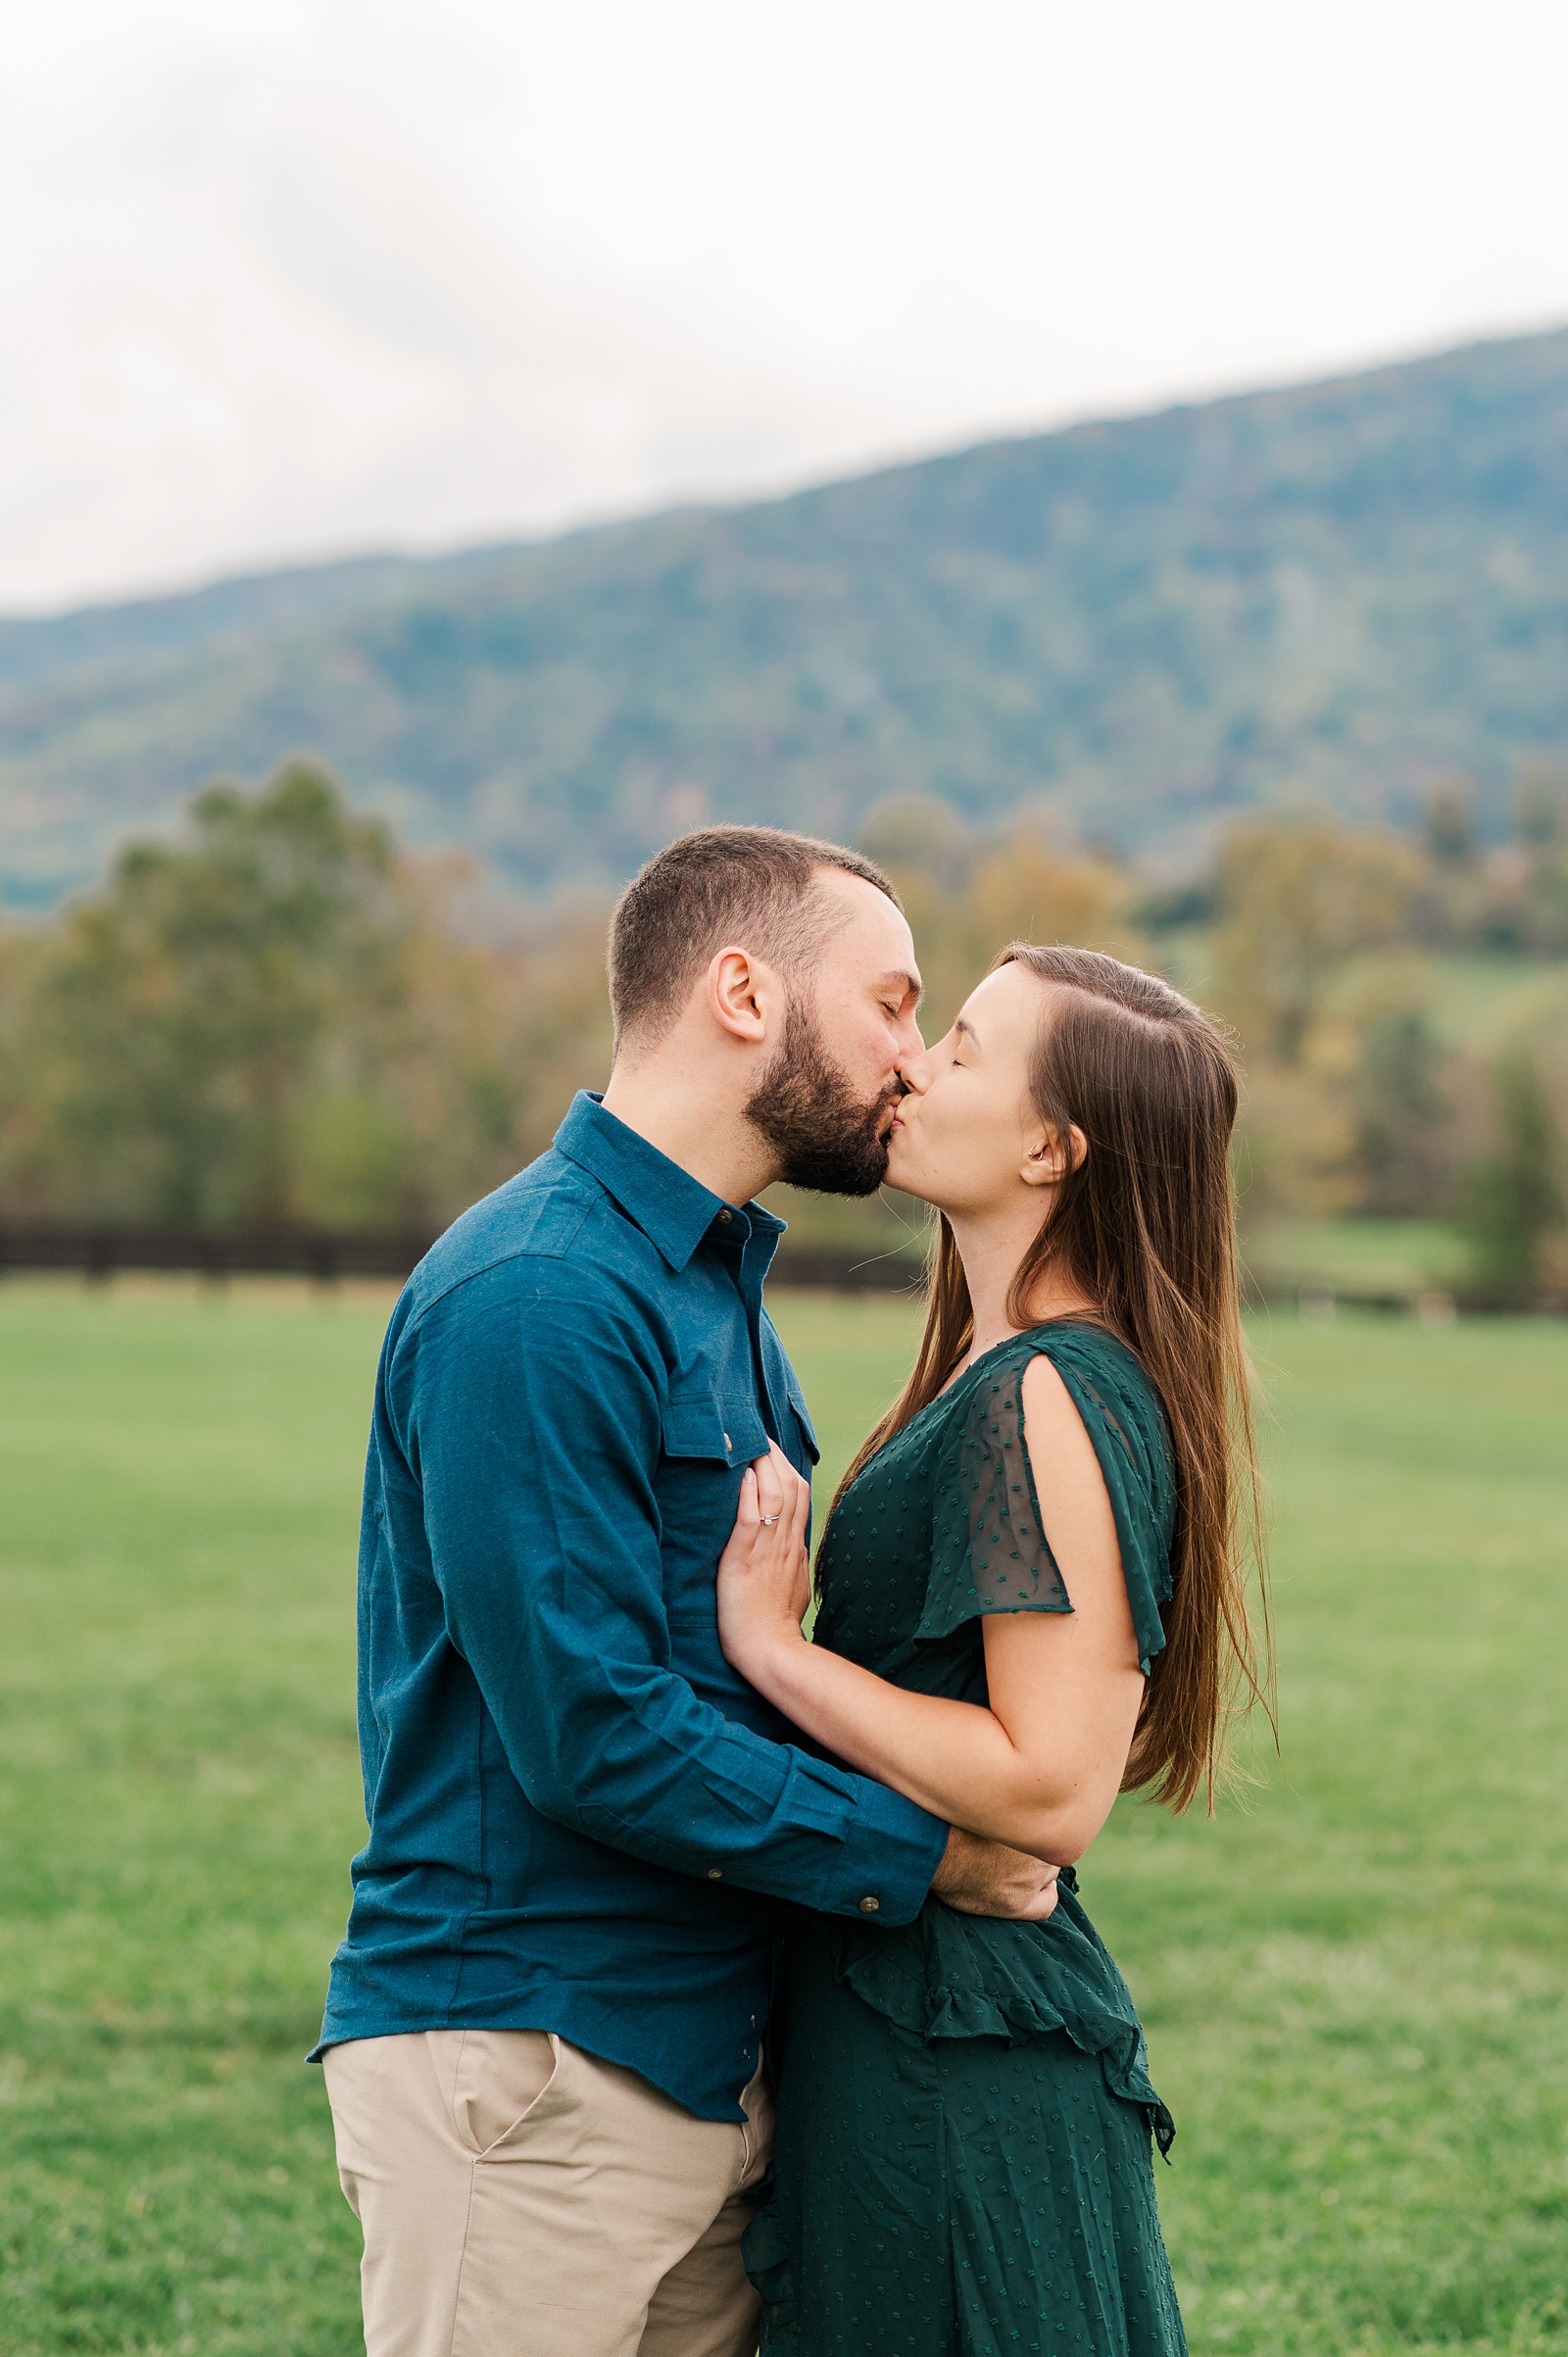 King Family Vineyards Engagement Session Location in Crozet. Virginia Wedding Photographer